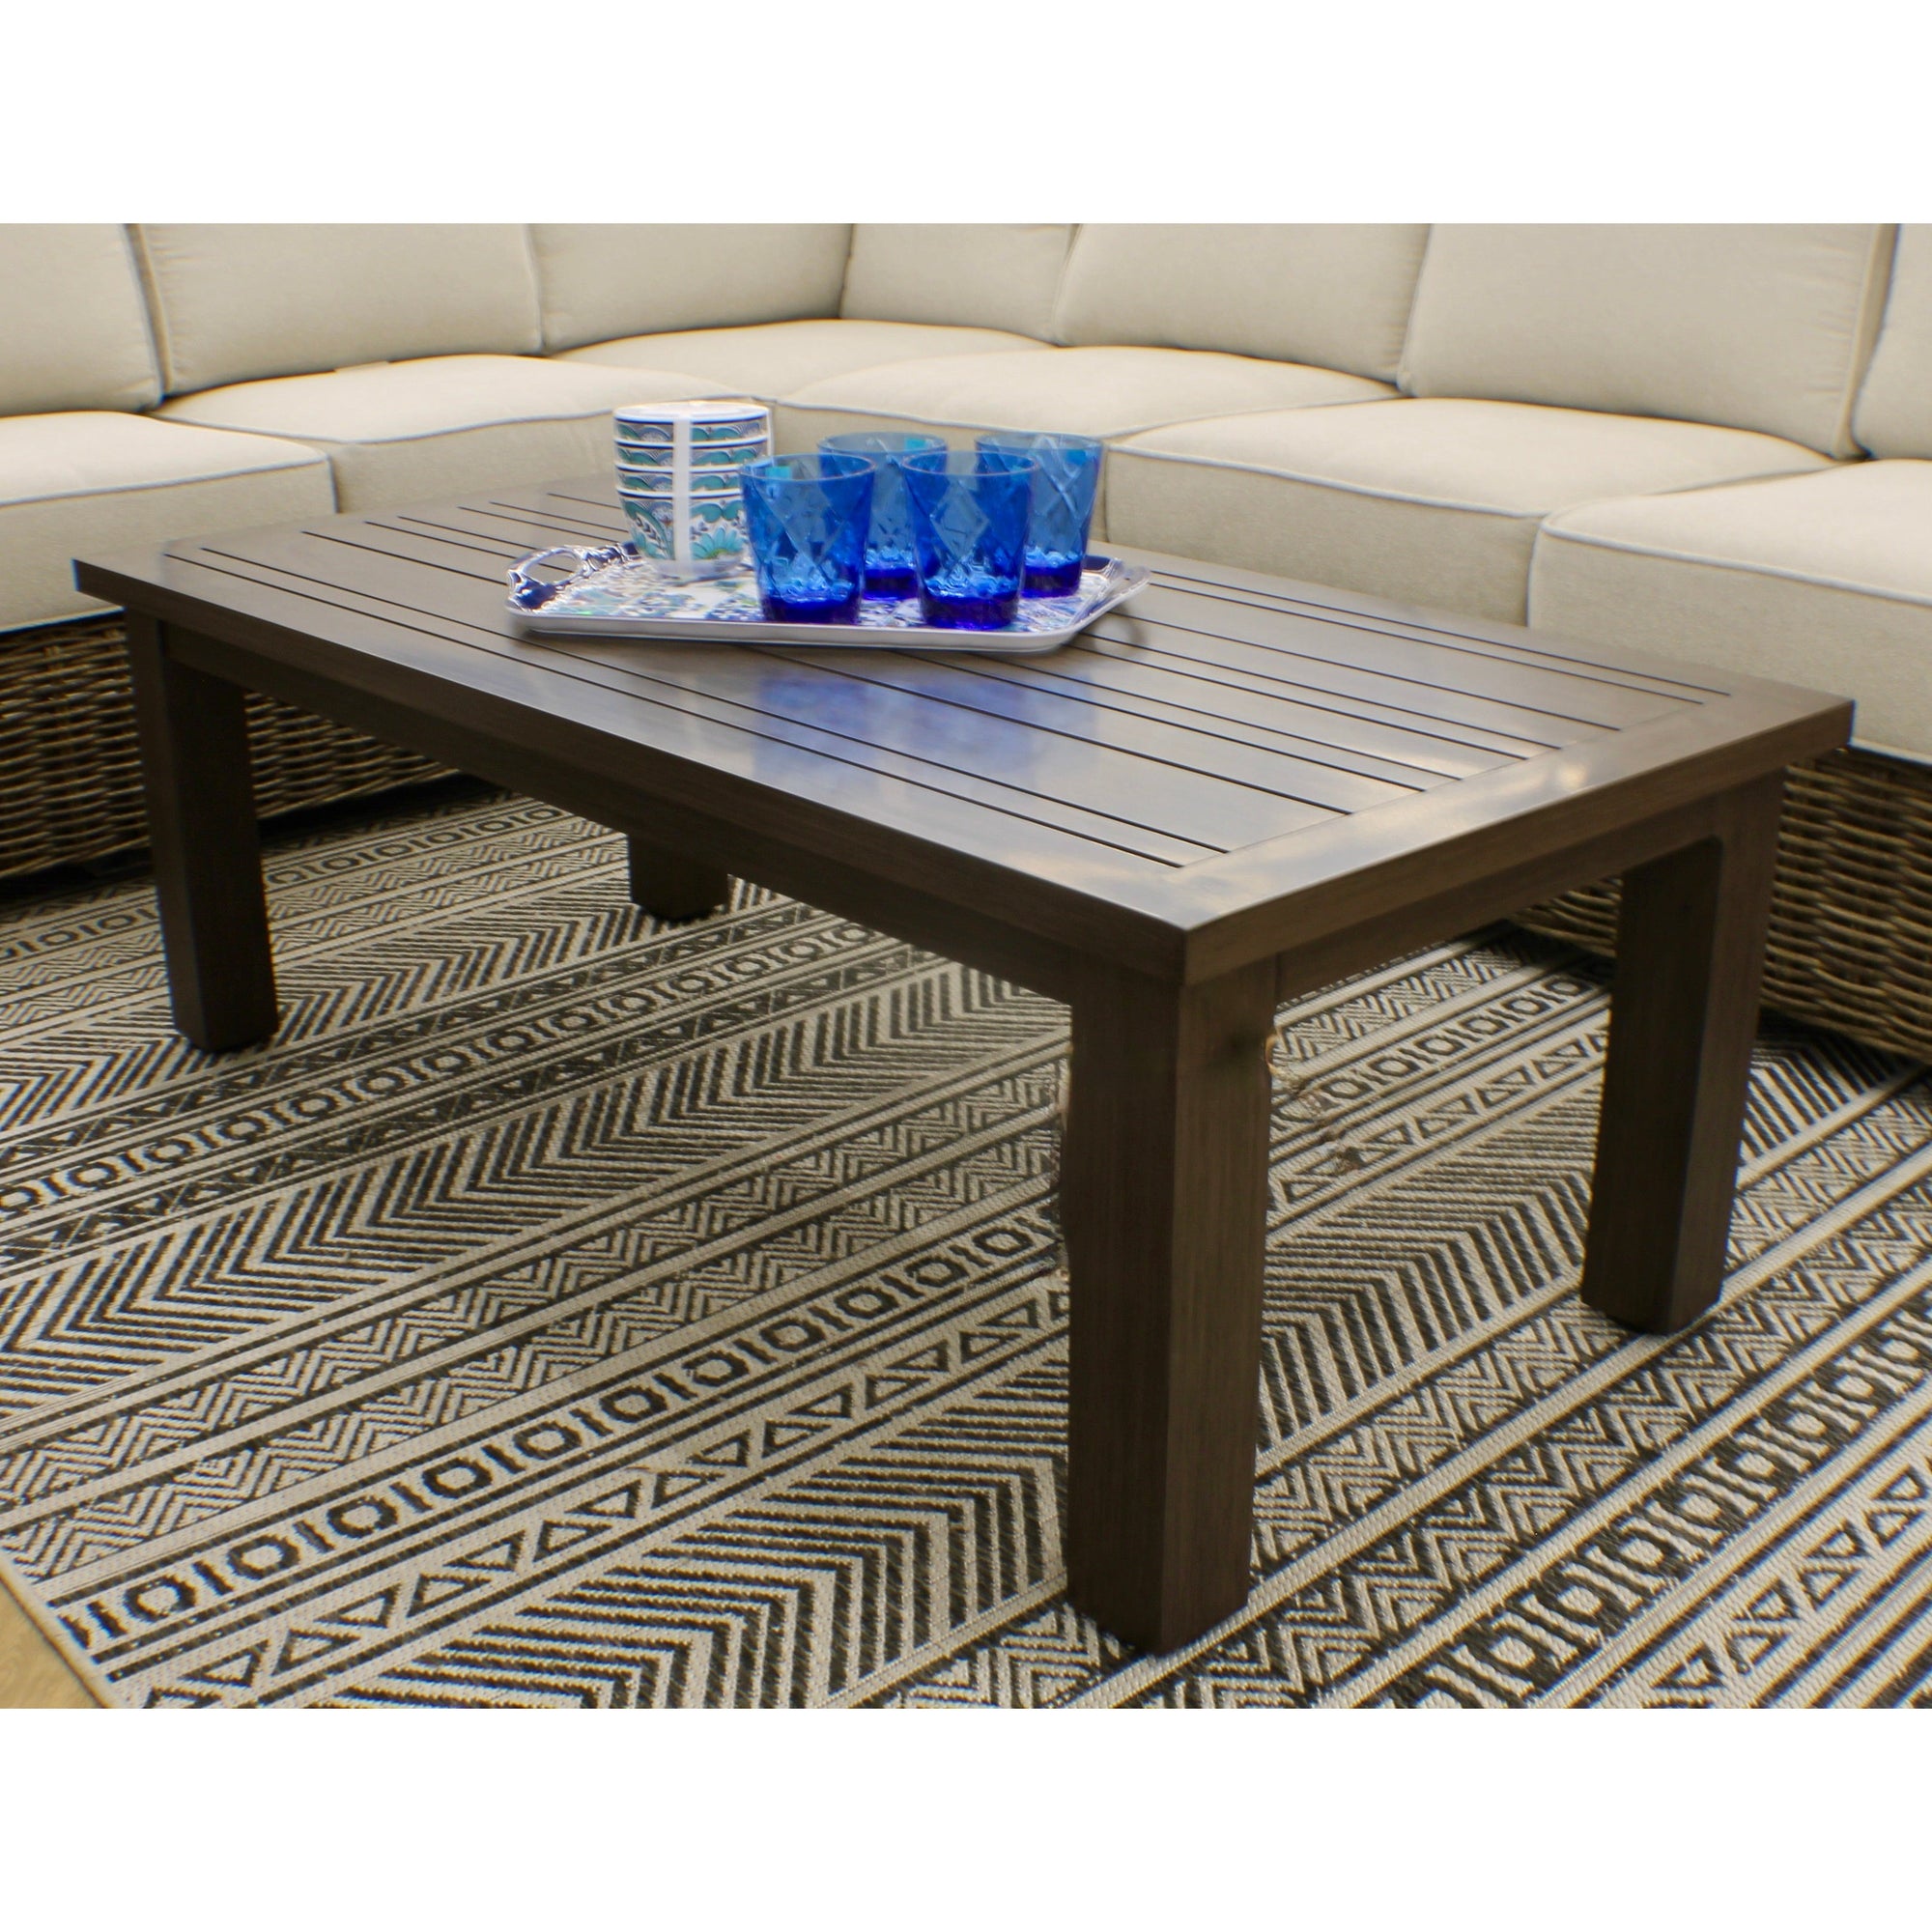 Carmel Brown Outdoor 52" Coffee Table